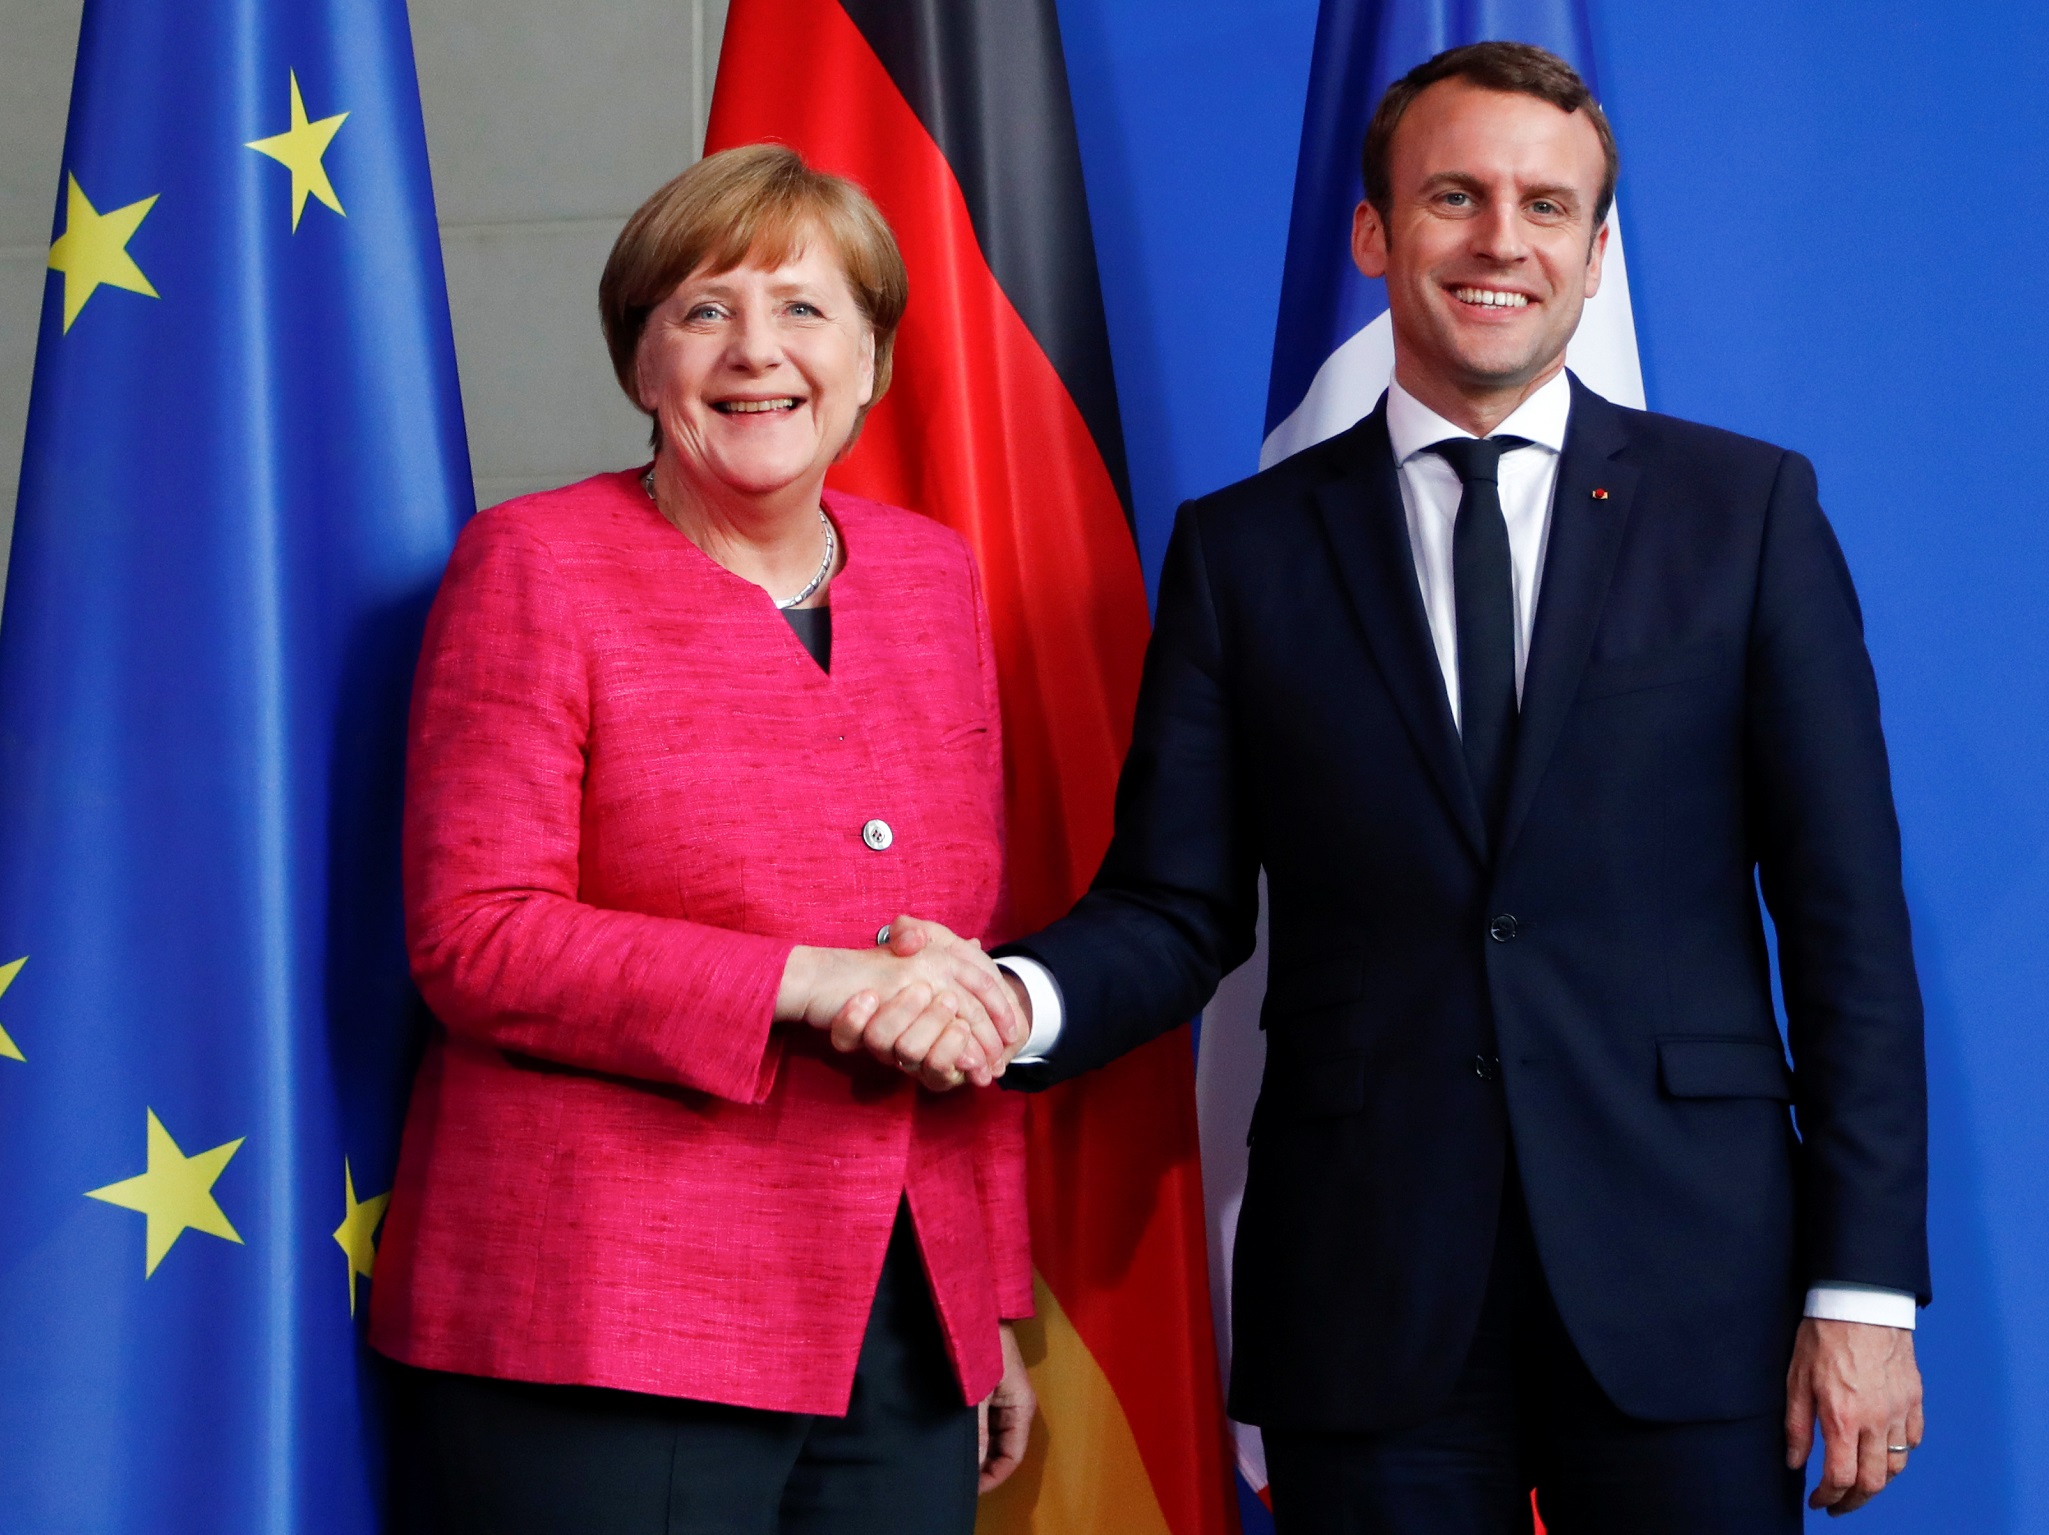 German Chancellor Angela Merkel and French President Emmanuel Macron shake hands after a news conference at the Chancellery in Berlin, Germany, May 15, 2017.   REUTERS/Fabrizio Bensch - RTX35YPE